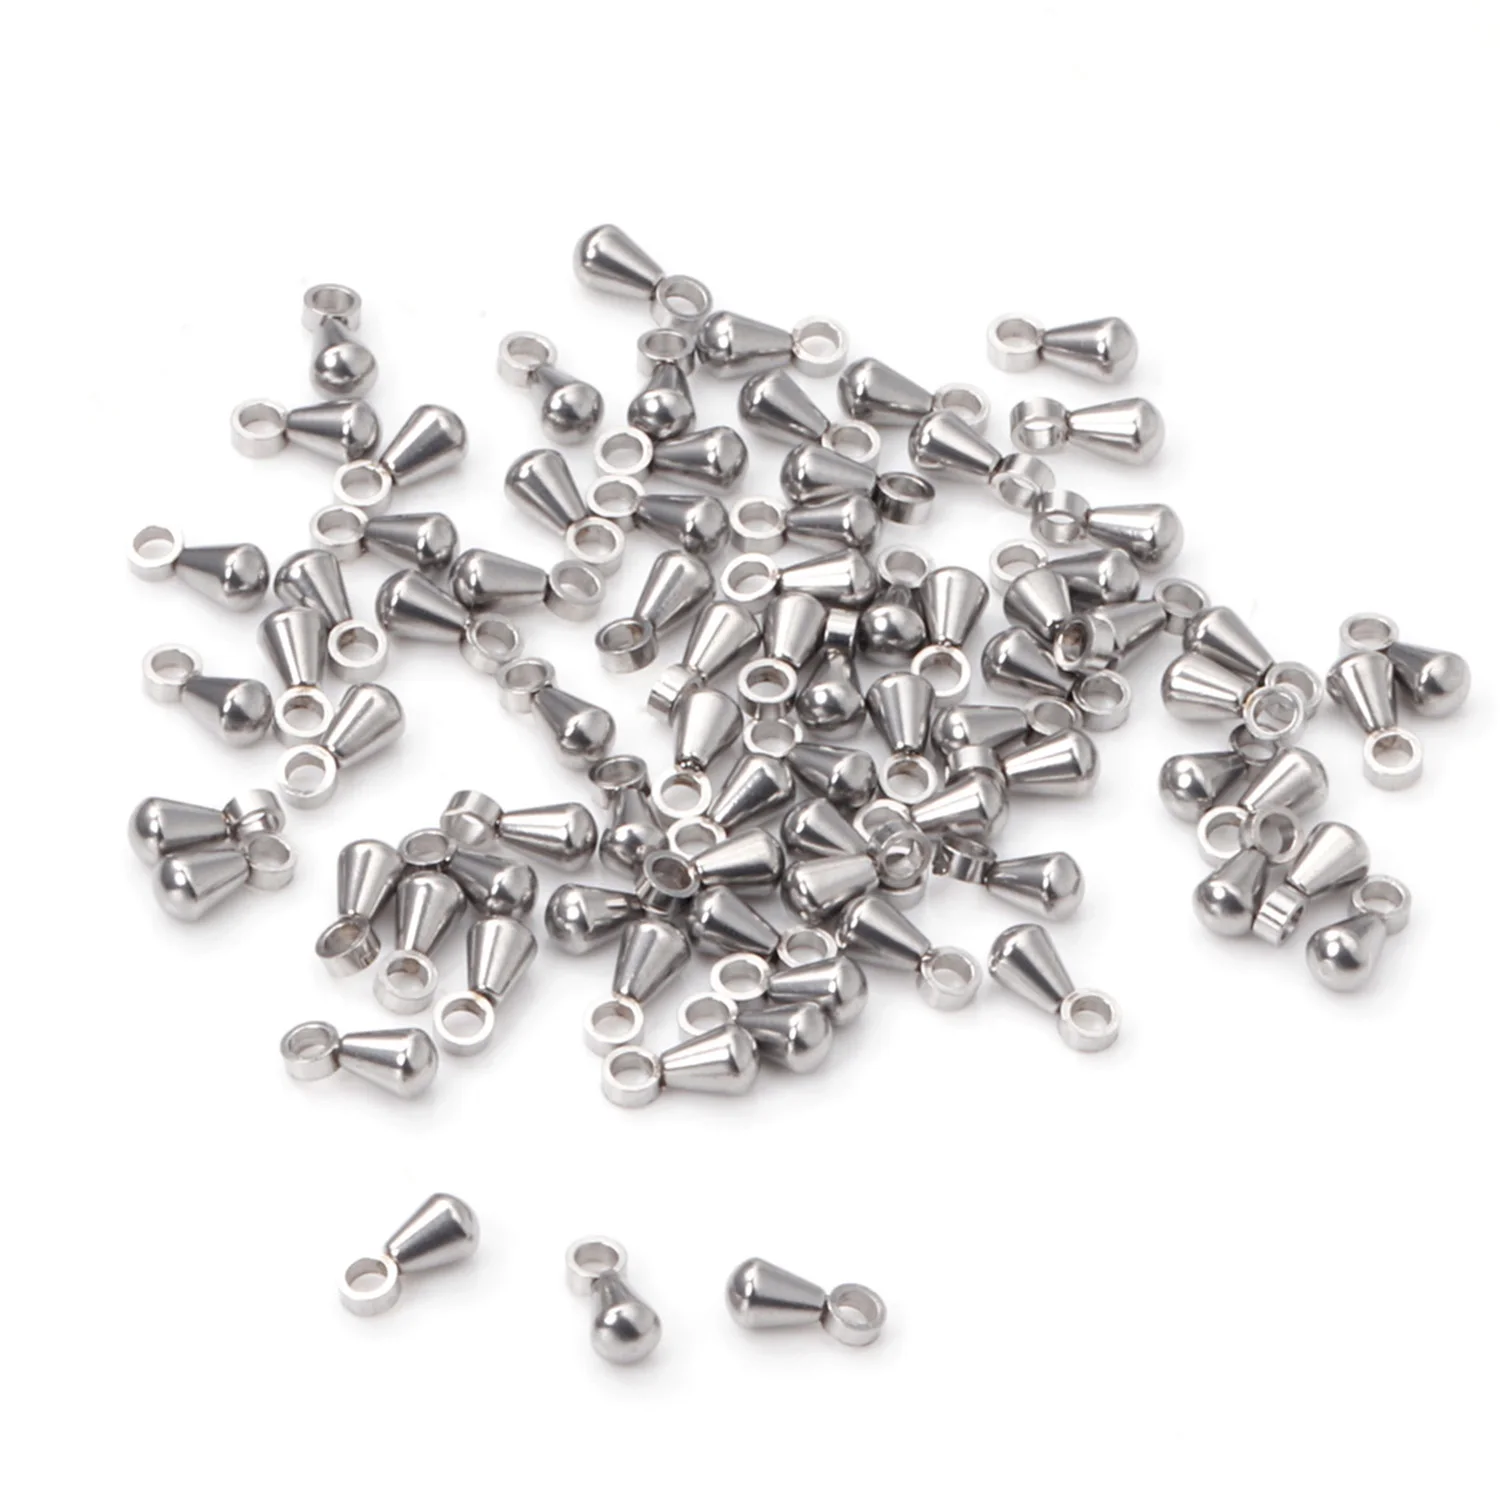 ASON 100Pcs/Lot 316L Stainless Steel Waterdrop End Beads For DIY Extender Chain Pendant Jewelry Making Findings Accessories